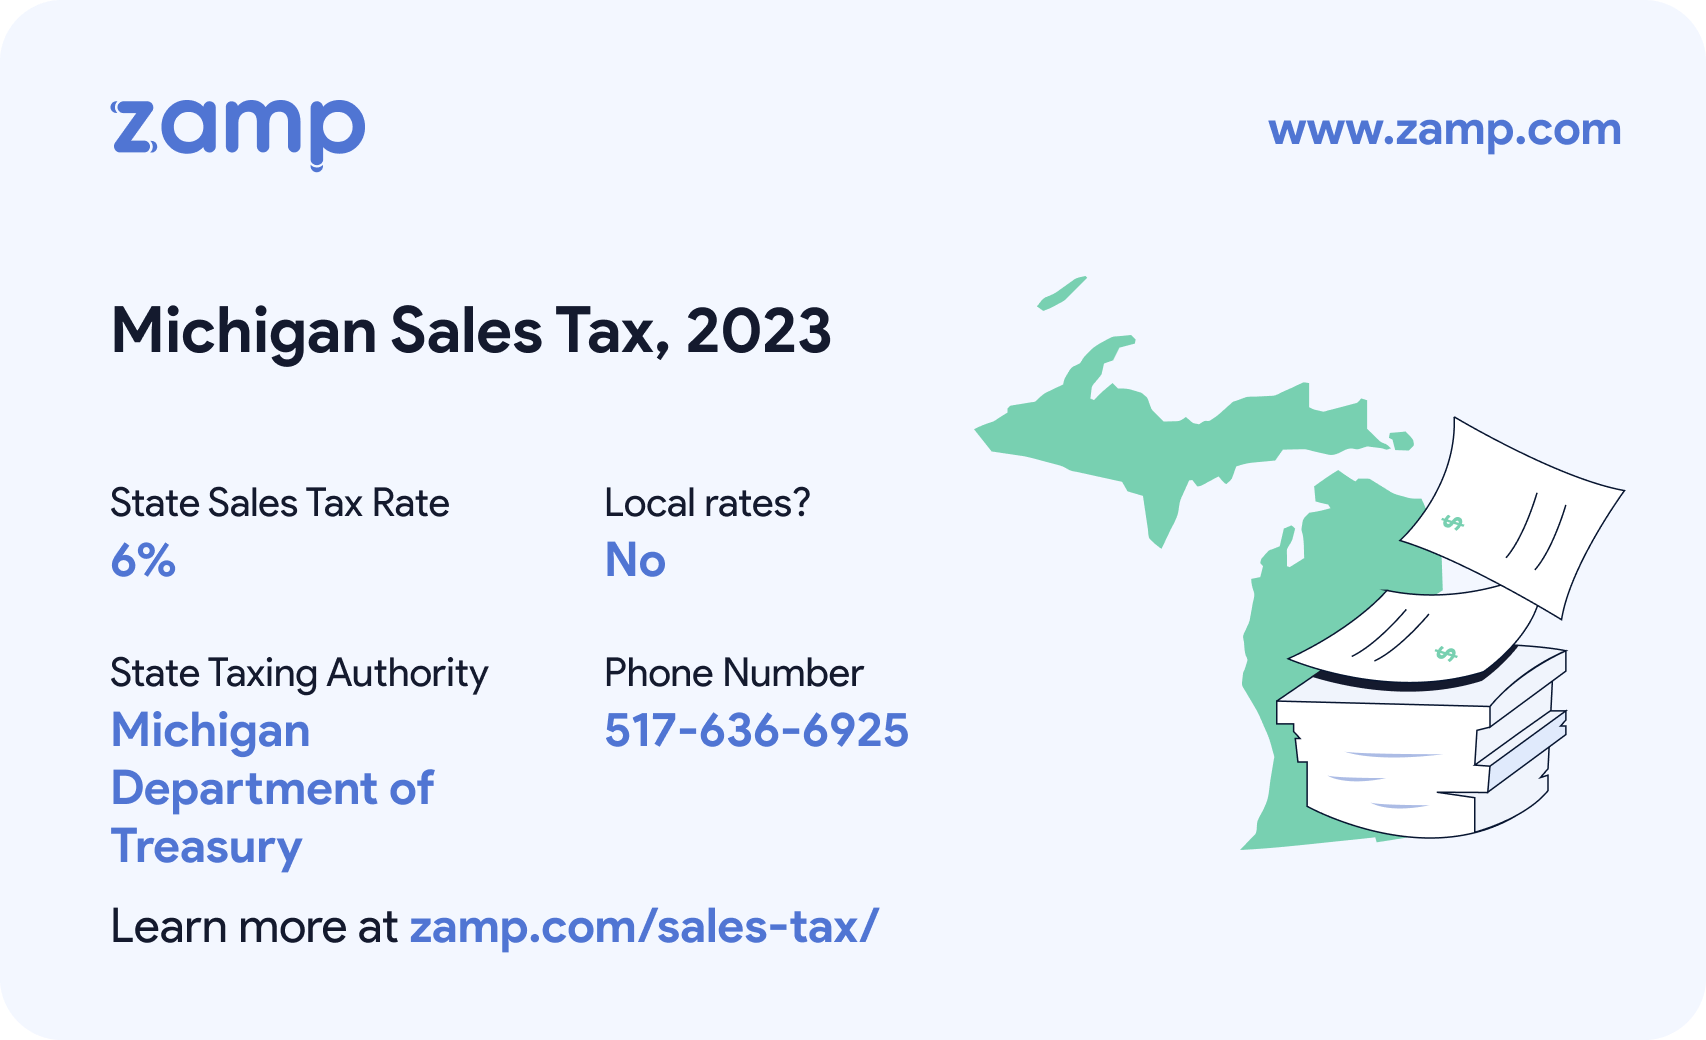 Michigan basic sales tax info for 2023 - State sales tax rate: 6%, Local rates? No; State Taxing Authority: Michigan Department of Treasury; and phone number 517-636-6925